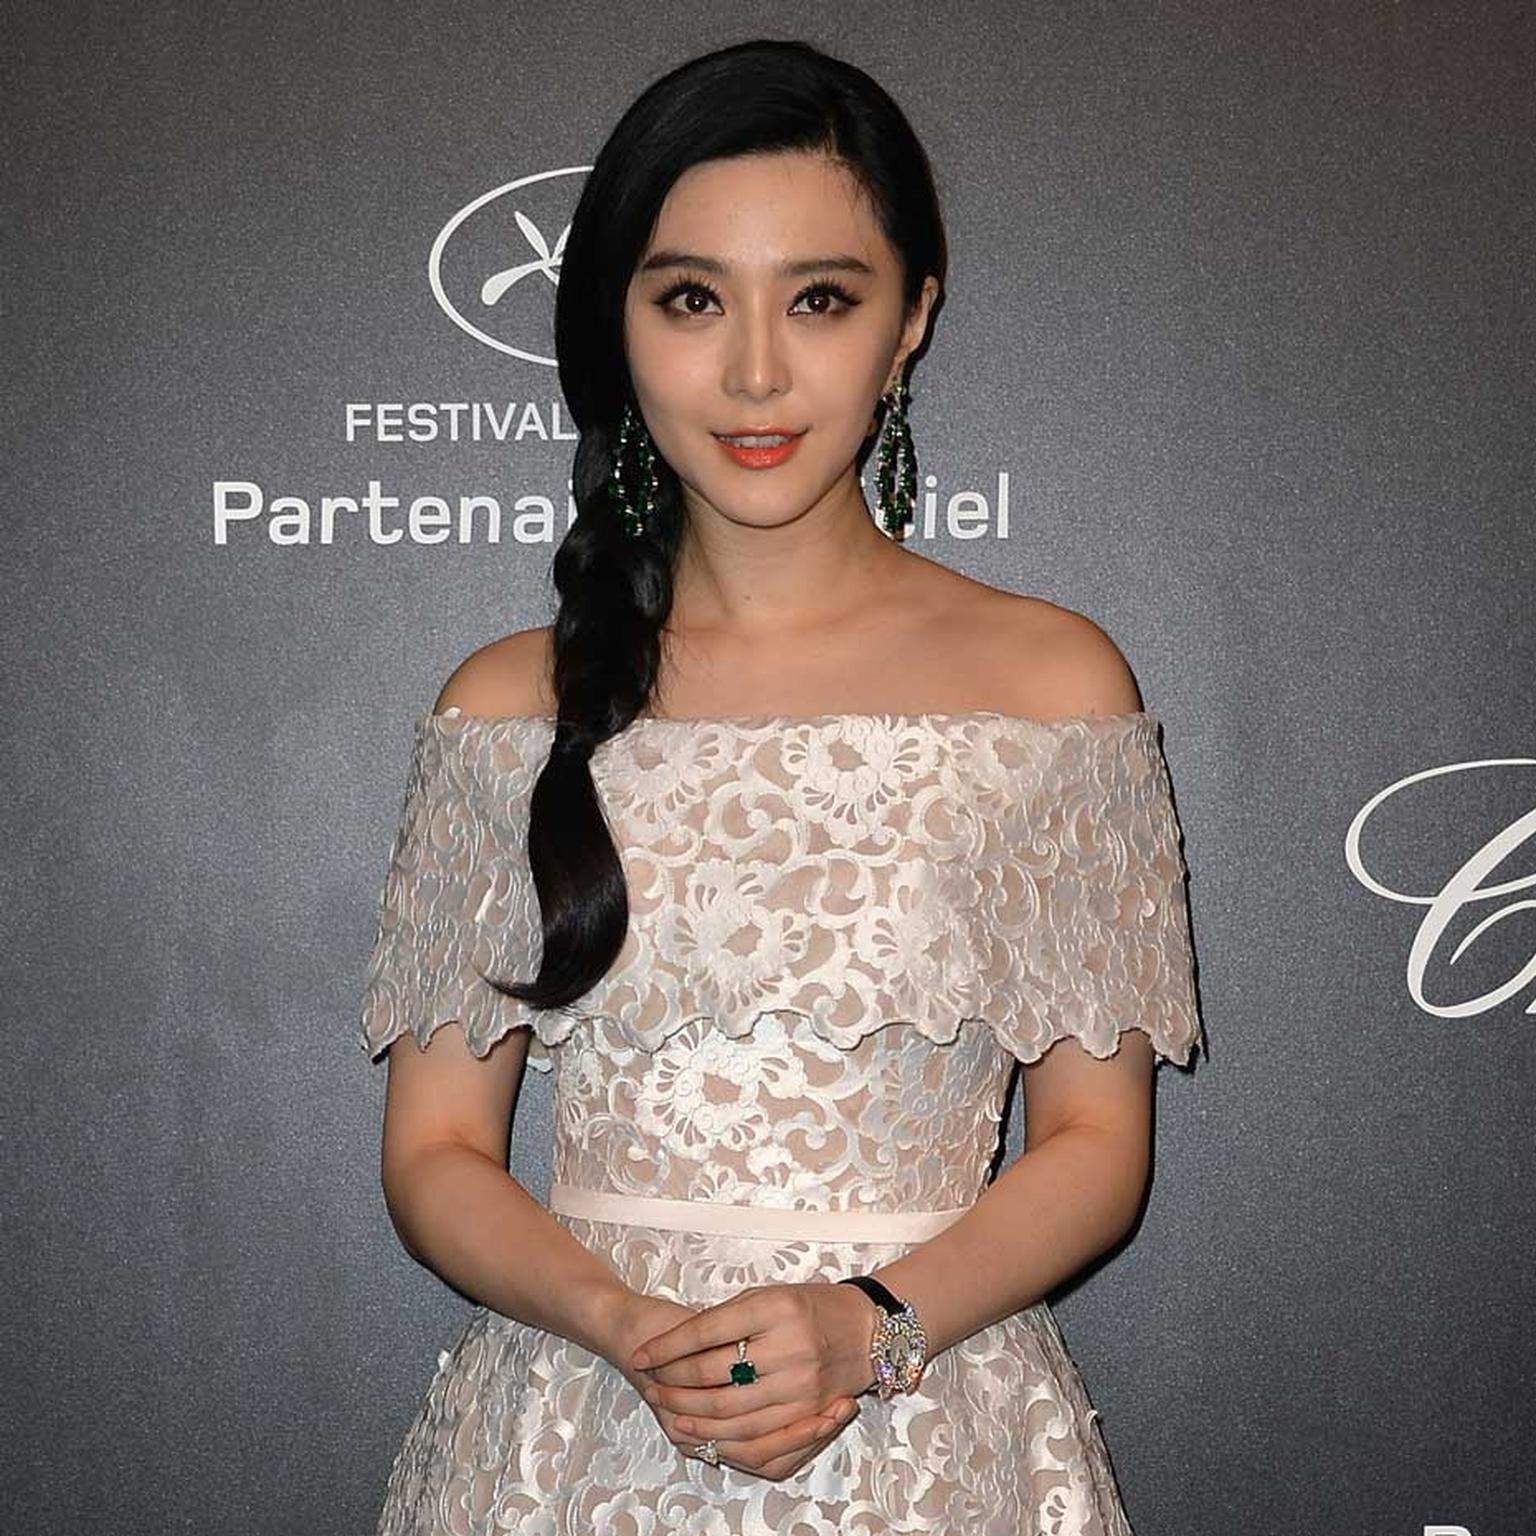 Actress Fan Bingbing, who accessorised her pretty dress with Chopard jewels and a high jewellery watch, was one of 700 guests in attendance at Chopard's GOLD party.